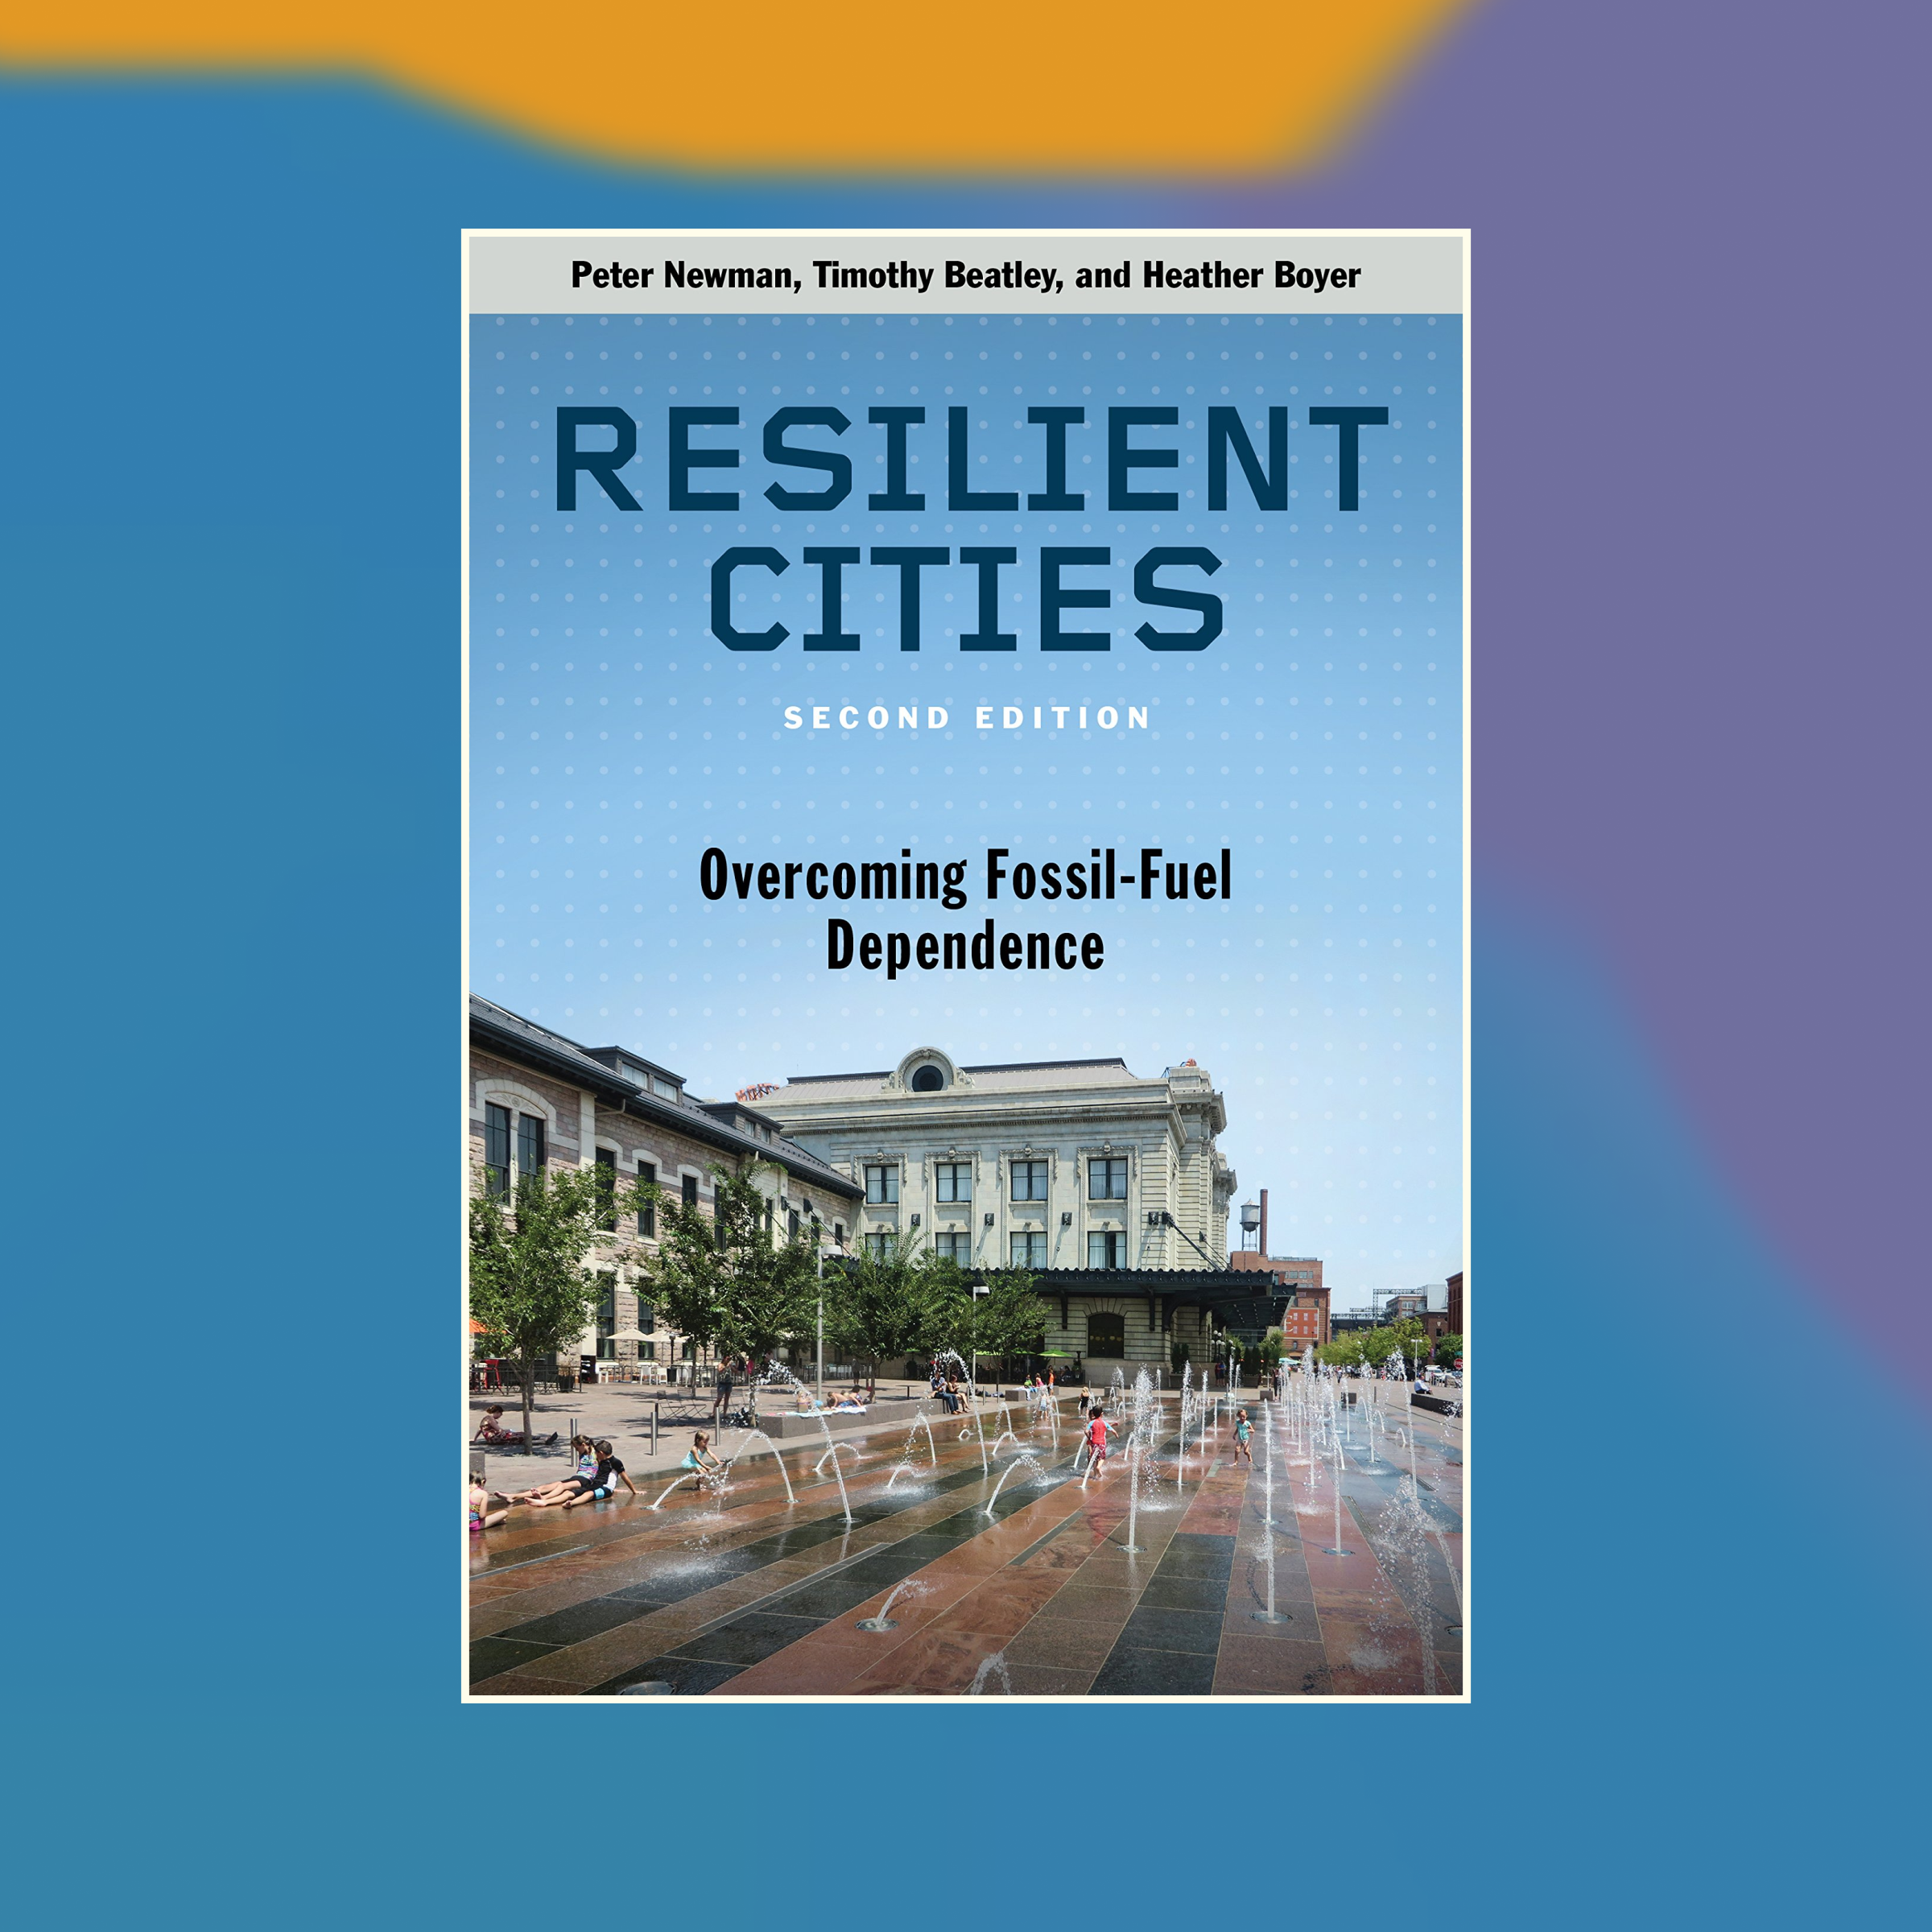 Book cover of Resilient Cities against an abstract painted background